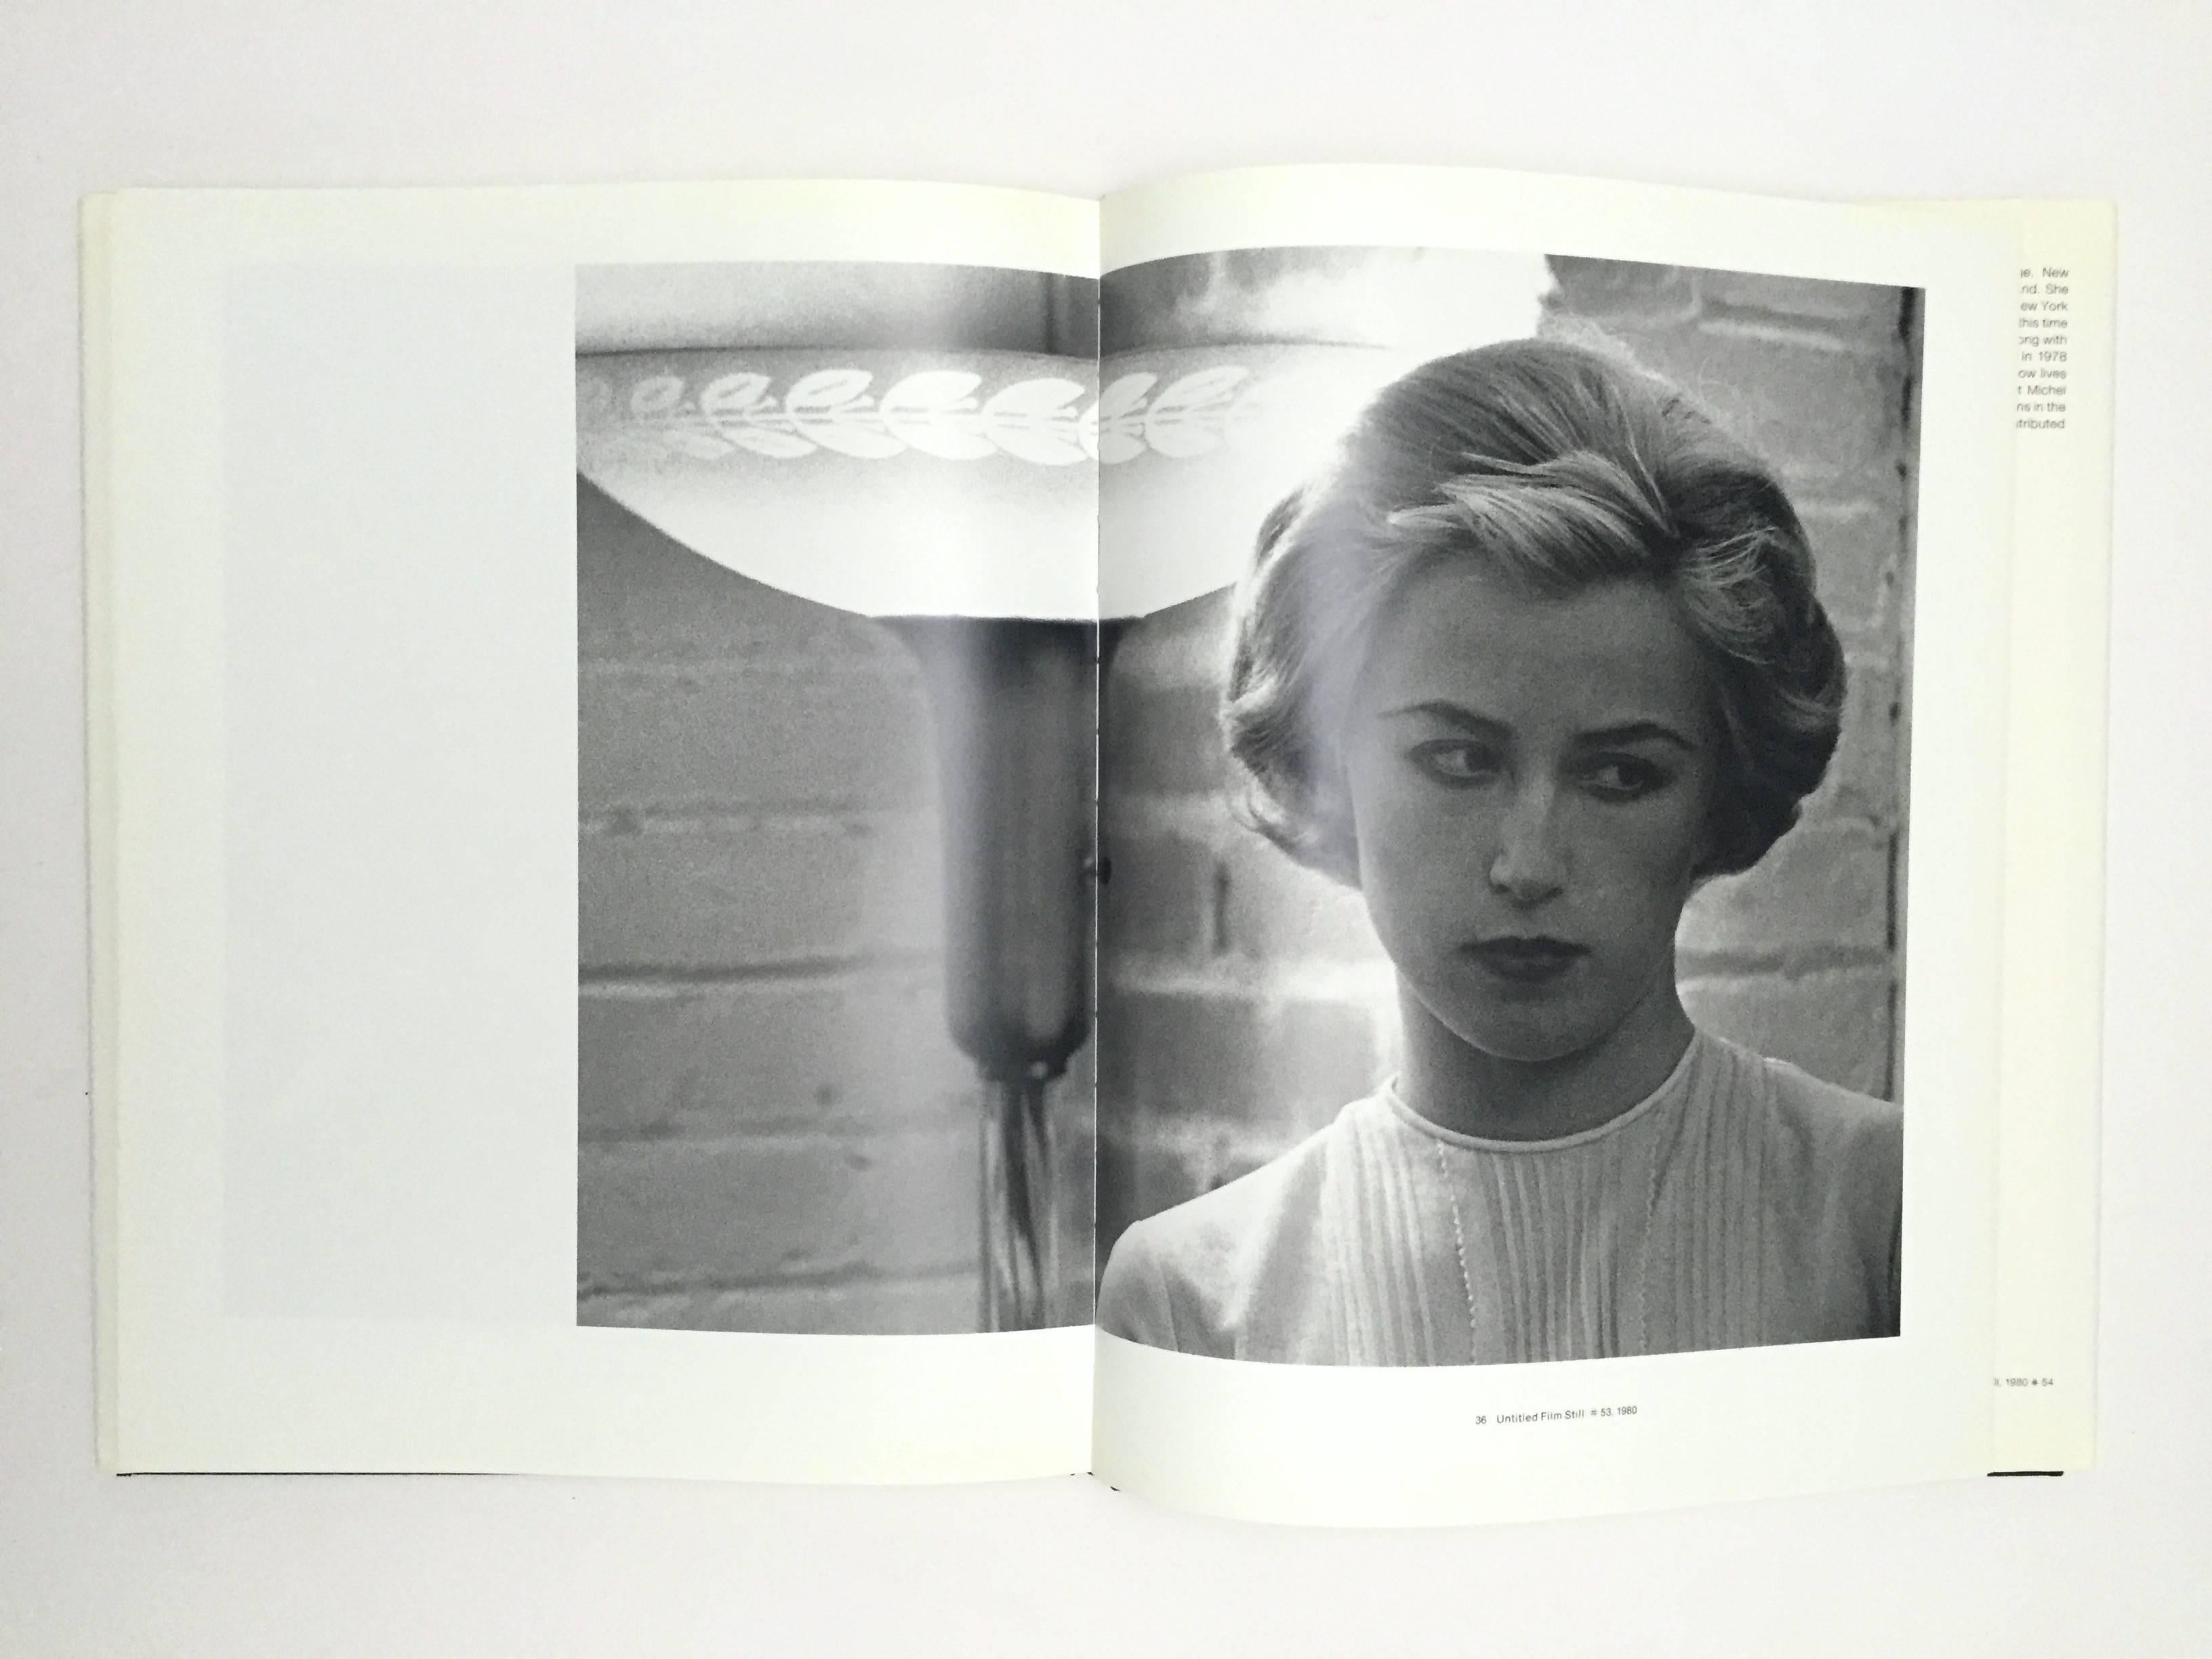 First Edition, published by Jonathan Cape, London 1990.

First edition monograph on Cindy Sherman's iconic early work: The 'Untitled Film Stills' series of 40 photographs, with an introductory essay by noted Art Historian Arthur C. Danto. Made